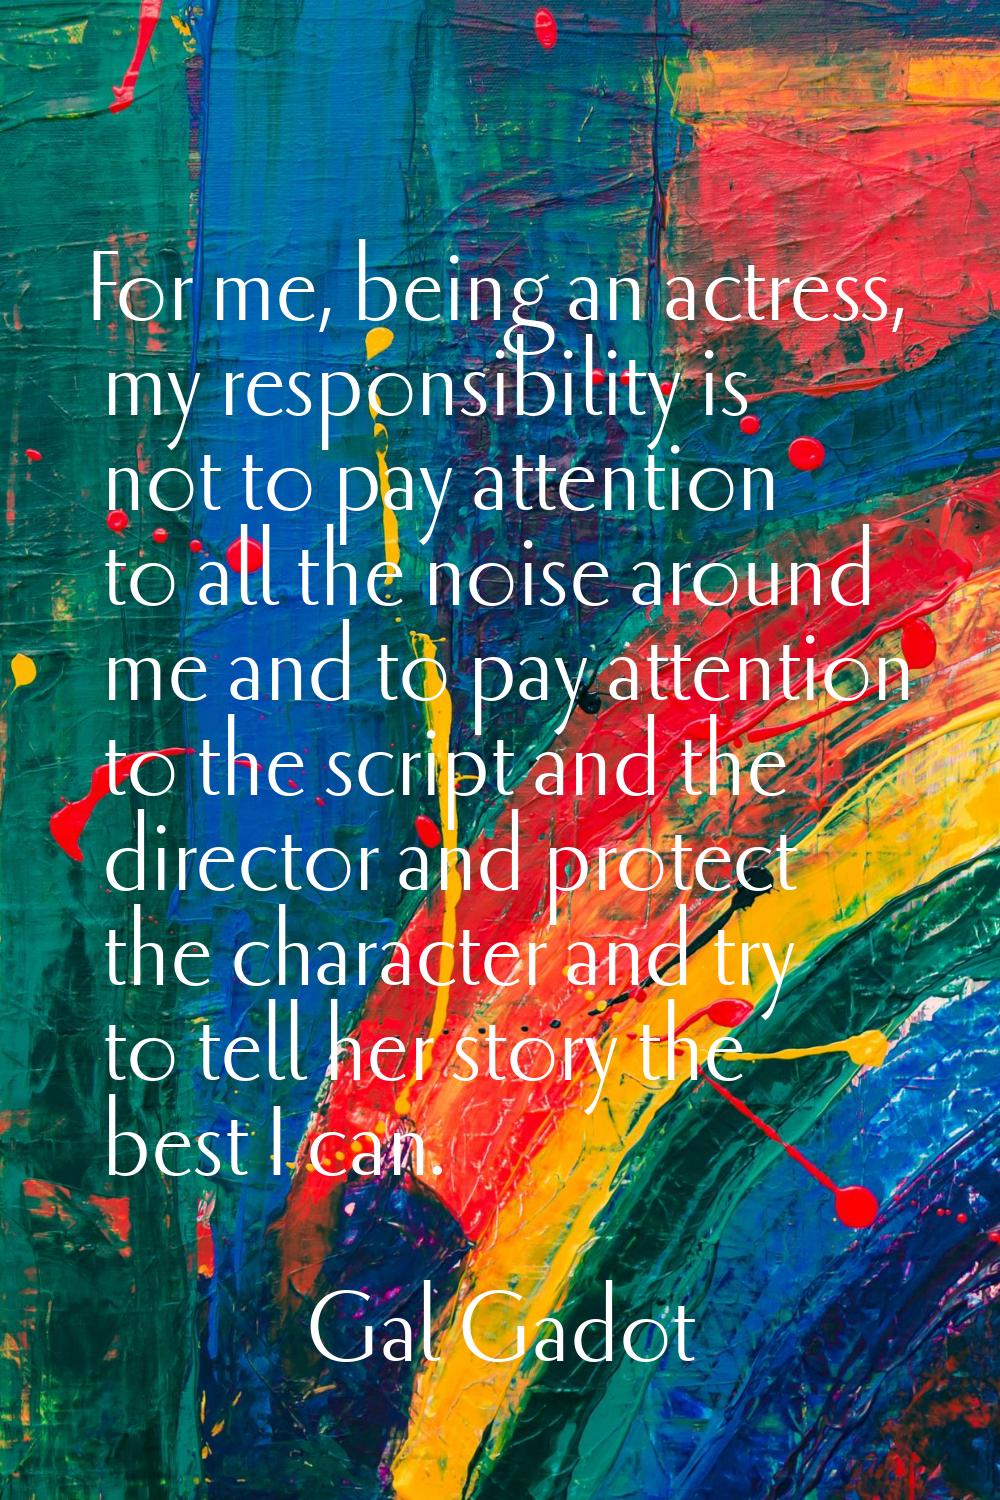 For me, being an actress, my responsibility is not to pay attention to all the noise around me and 